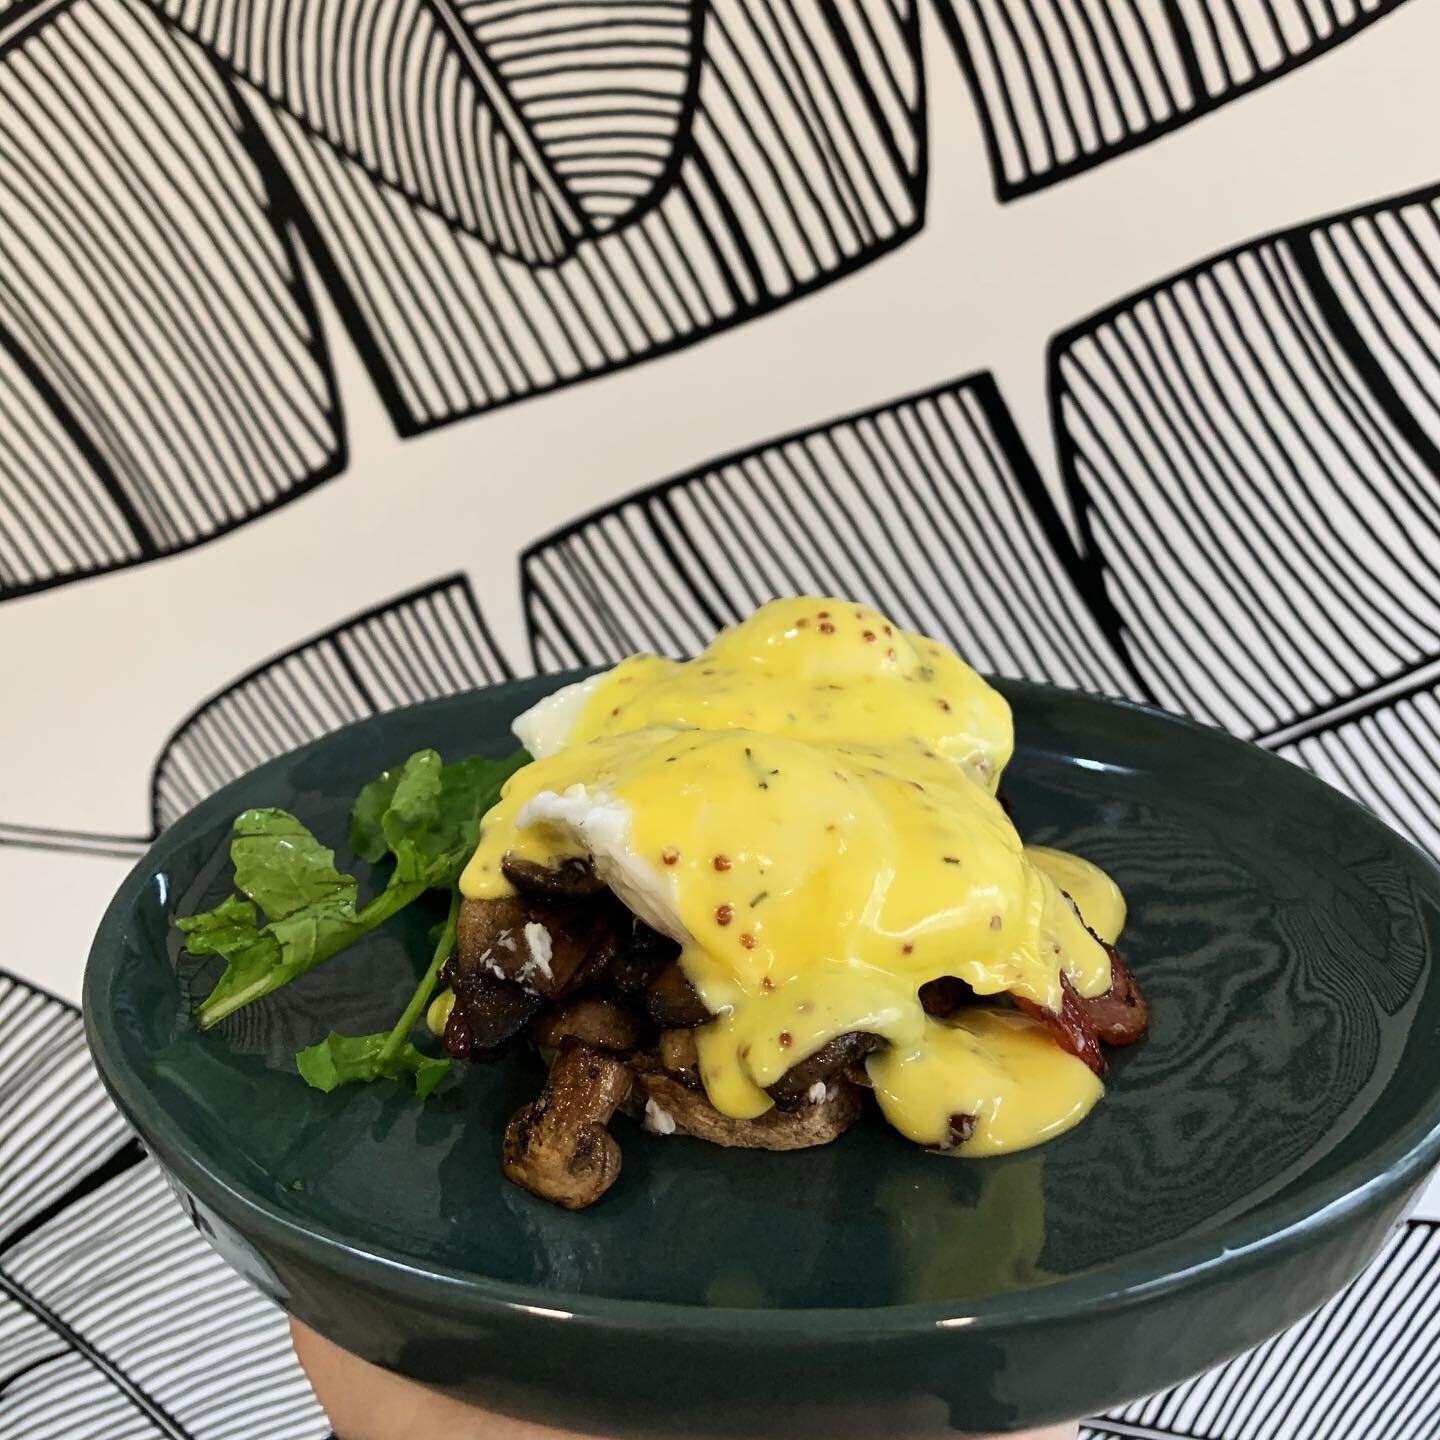 Your day can&rsquo;t go wrong with a Baconnaise for breakfast. Poached @usanafarm eggs on a slice of gluten free sourdough, a bed of mushrooms, streaky bacon and topped with our homemade hollandaise ✨